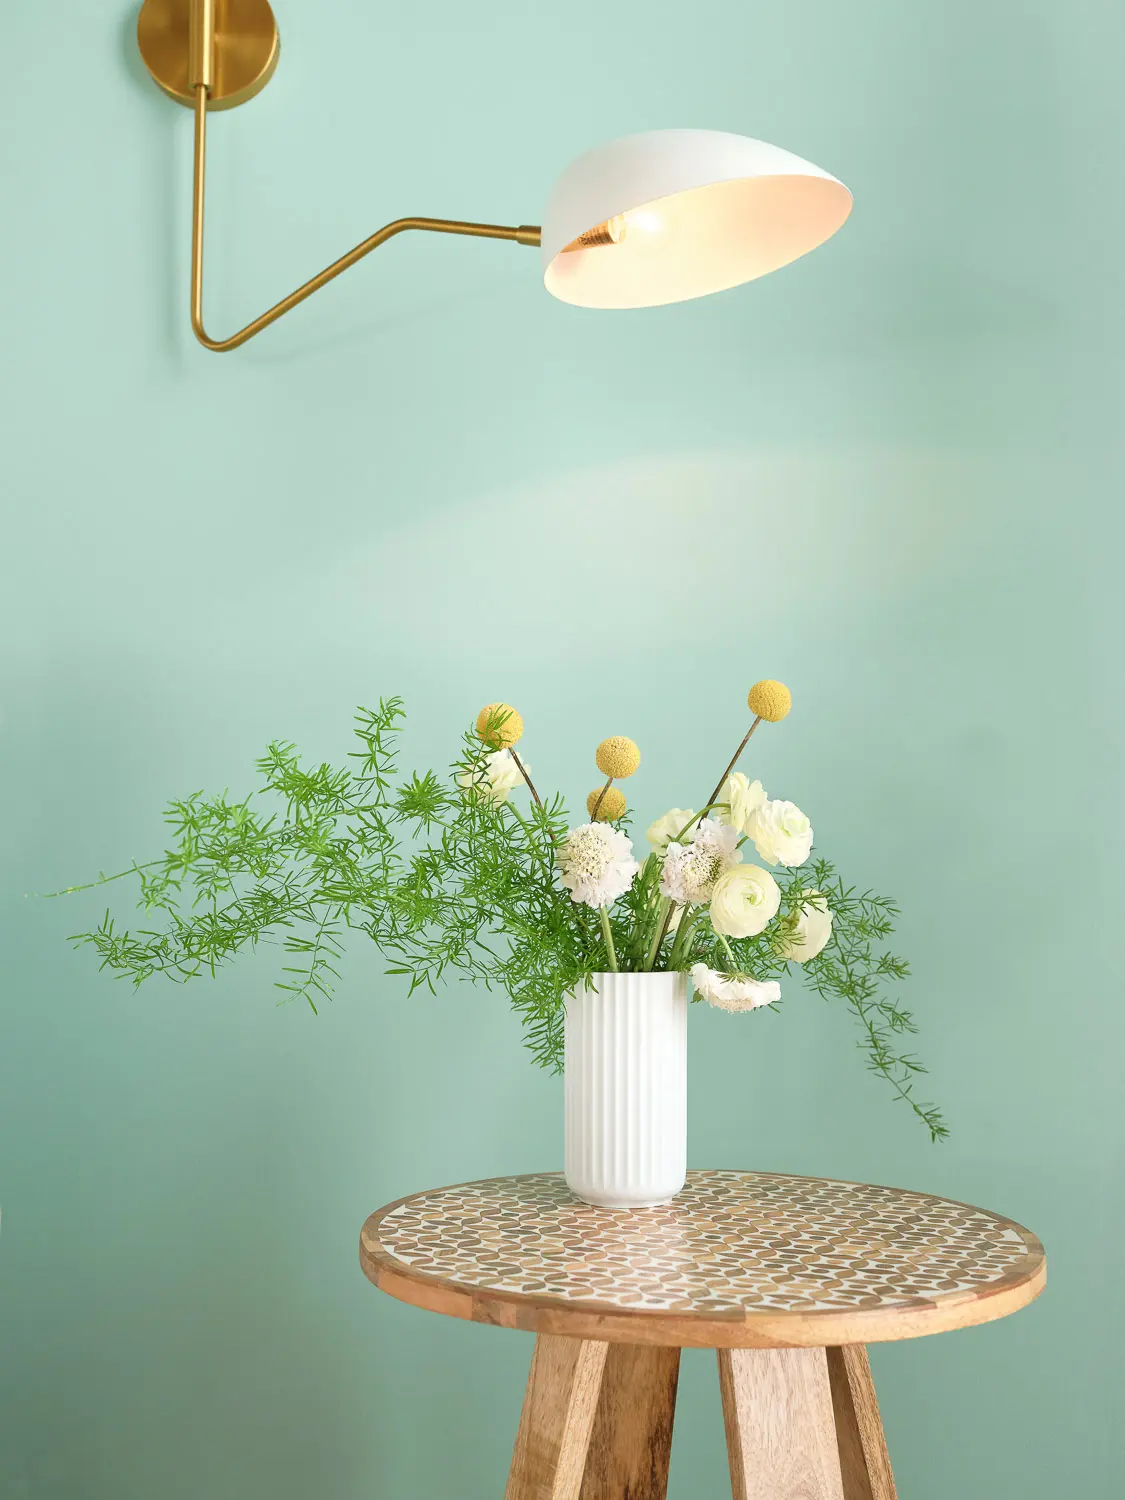 table with vase and flowers with a light above it